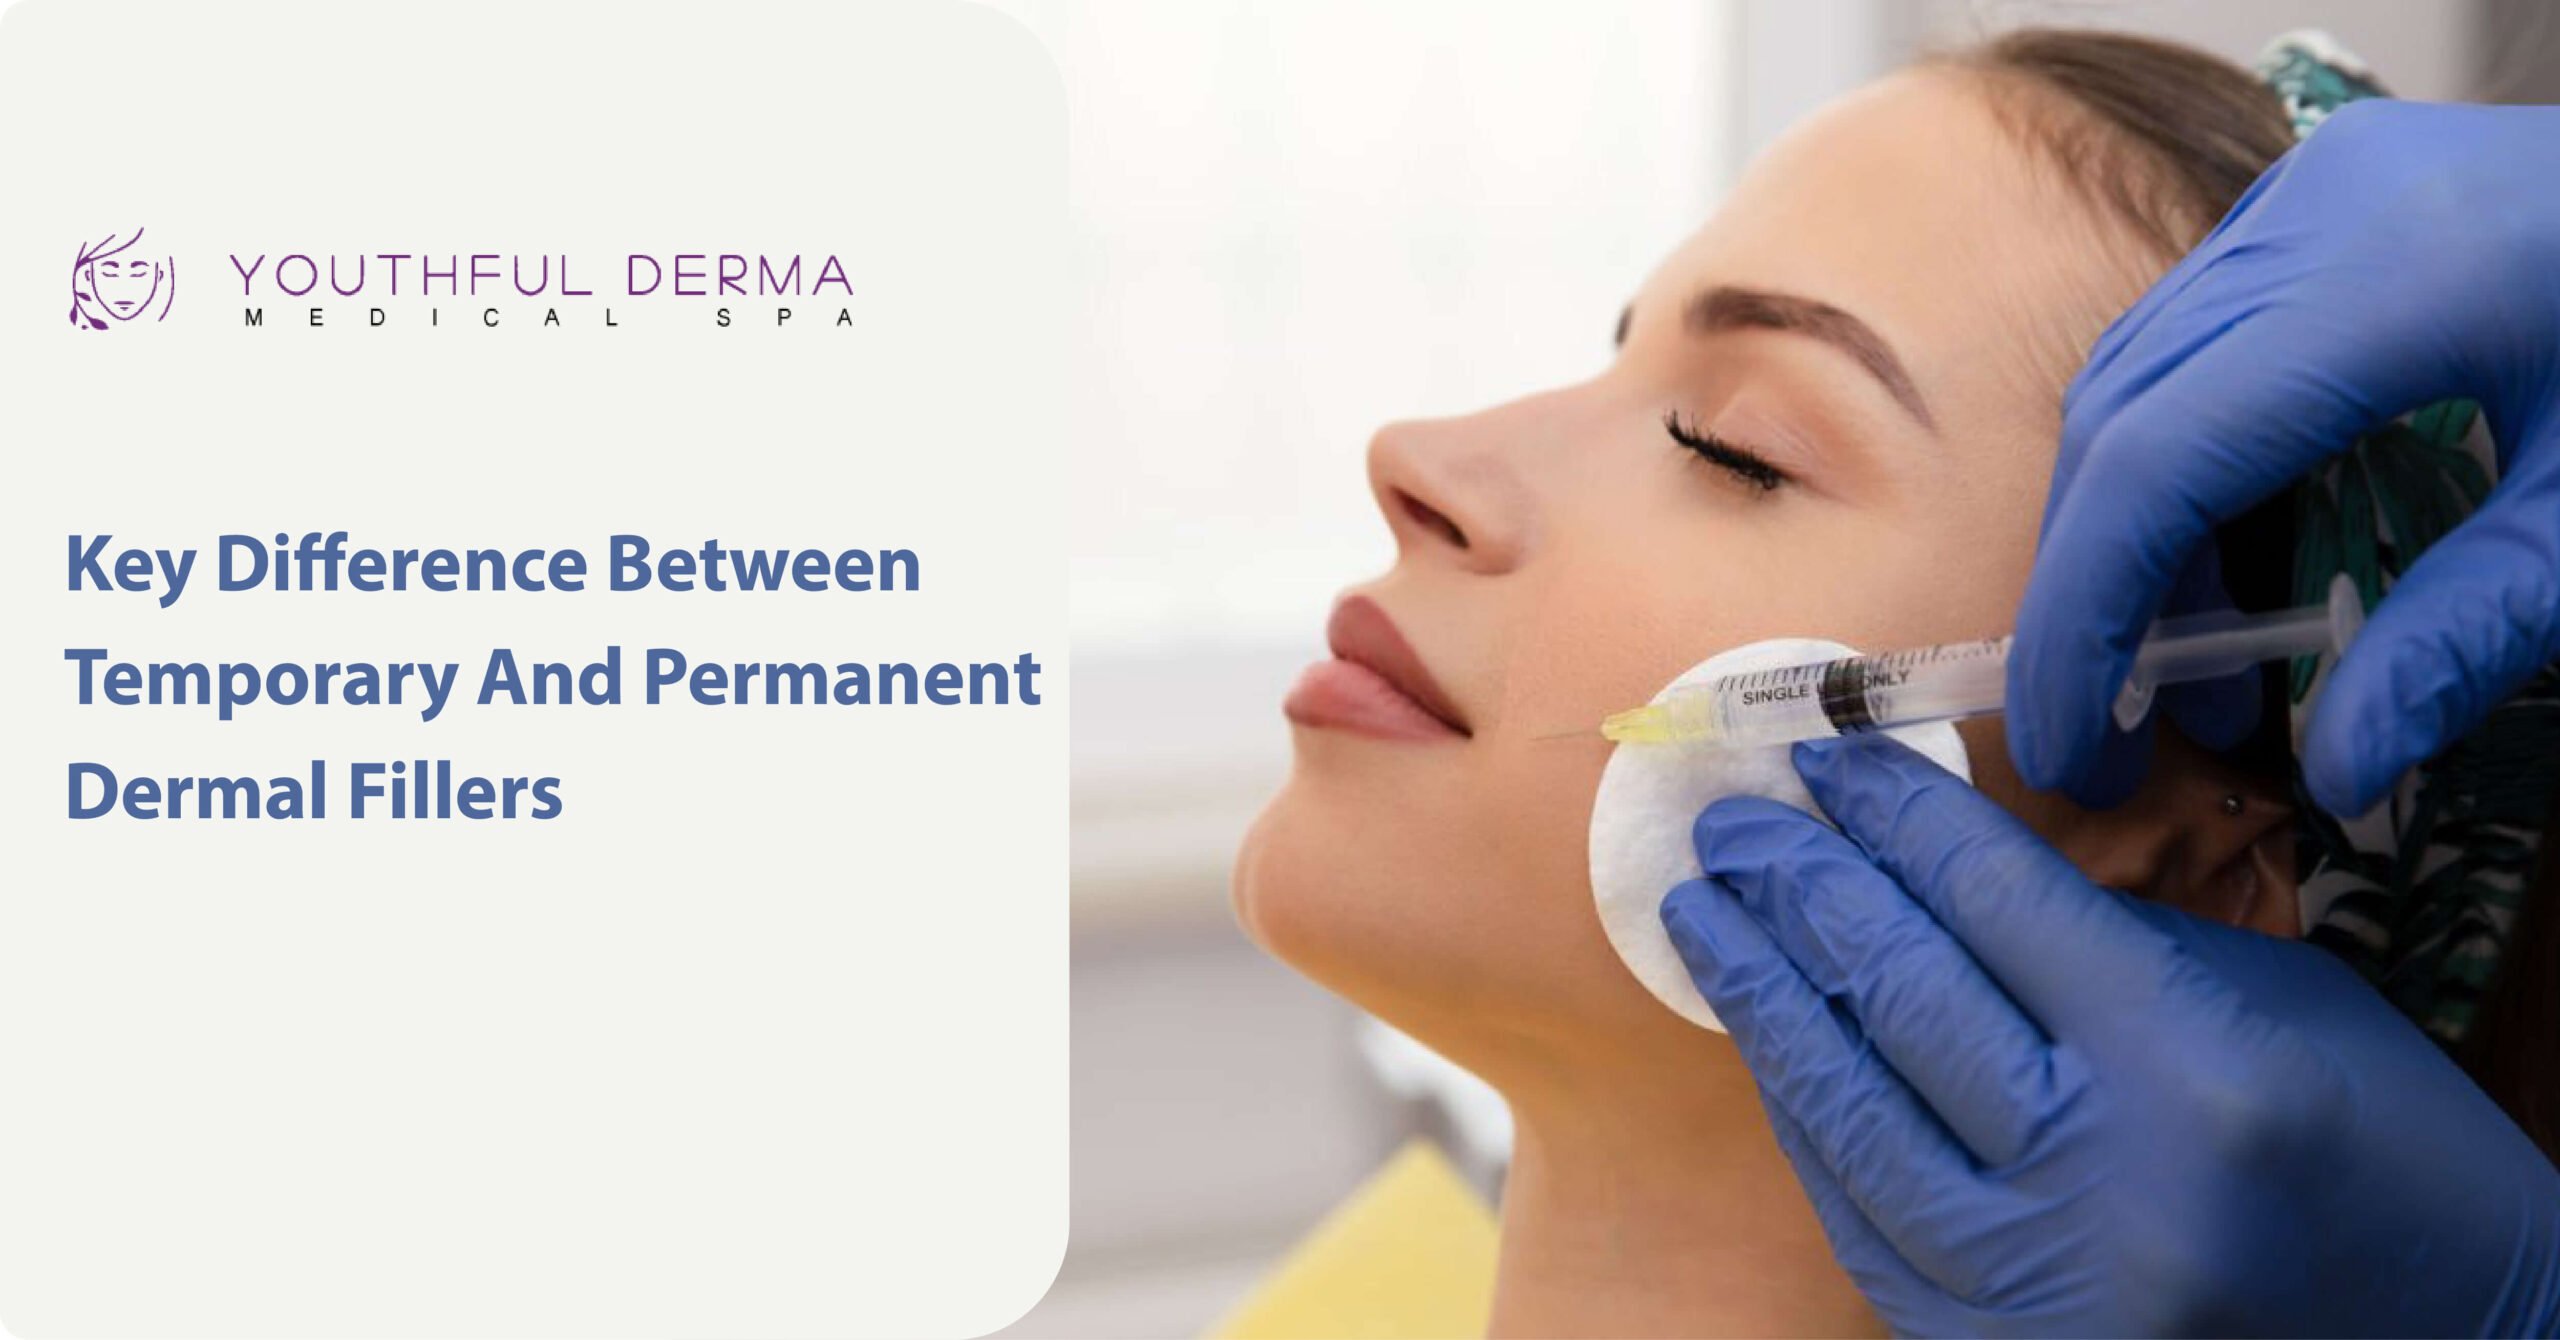 Temporary and Permanent Dermal Fillers banner by youthful derma